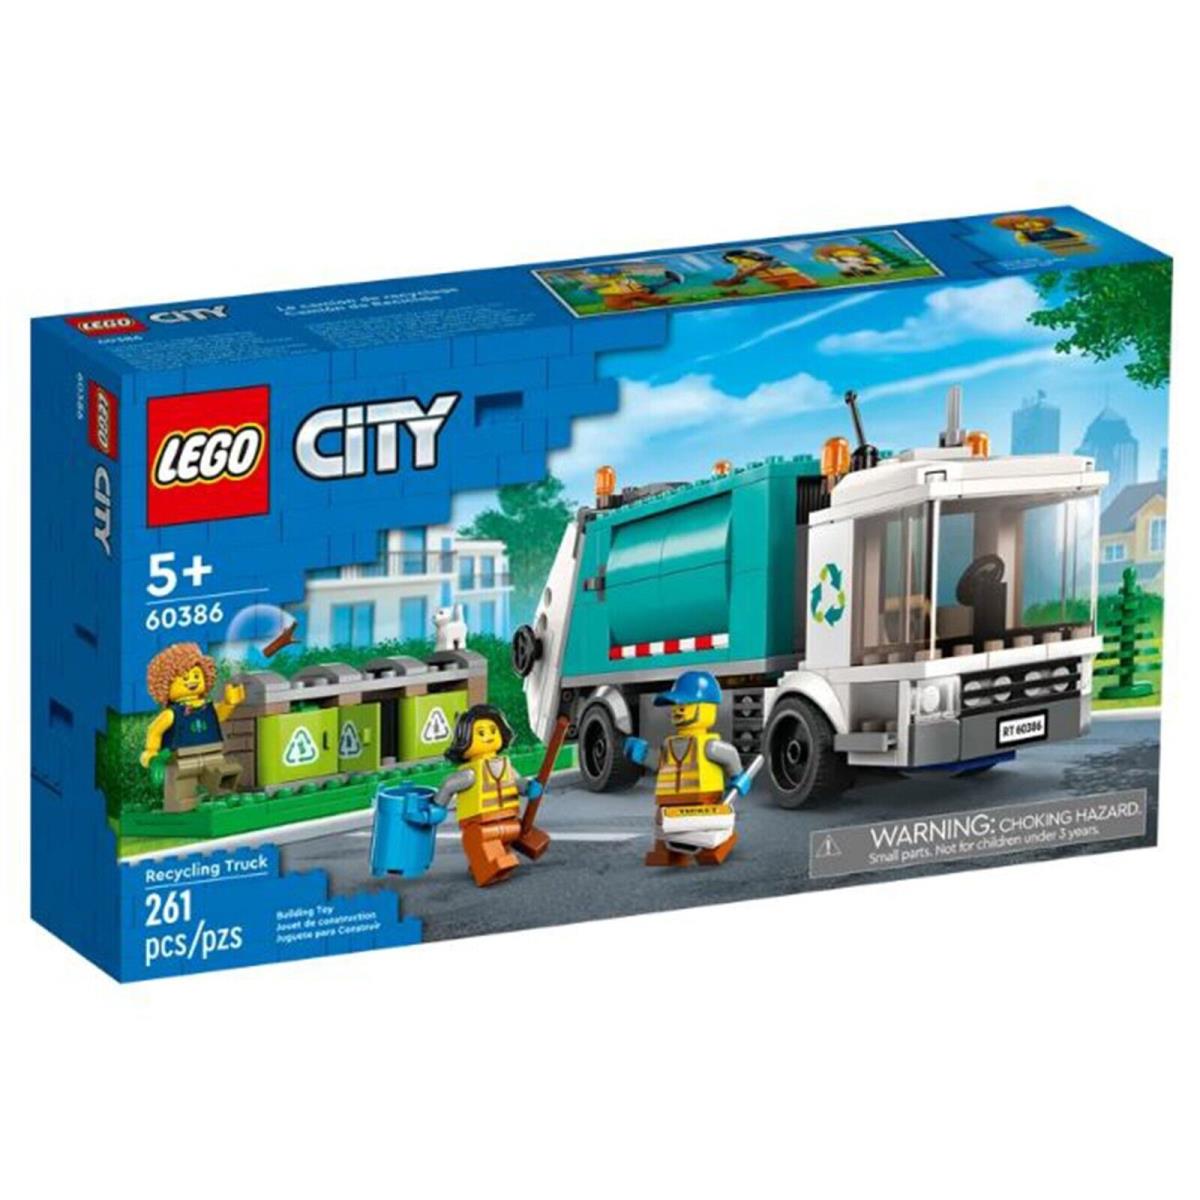 Lego City Recycling Truck Building Set 60386 IN Stock